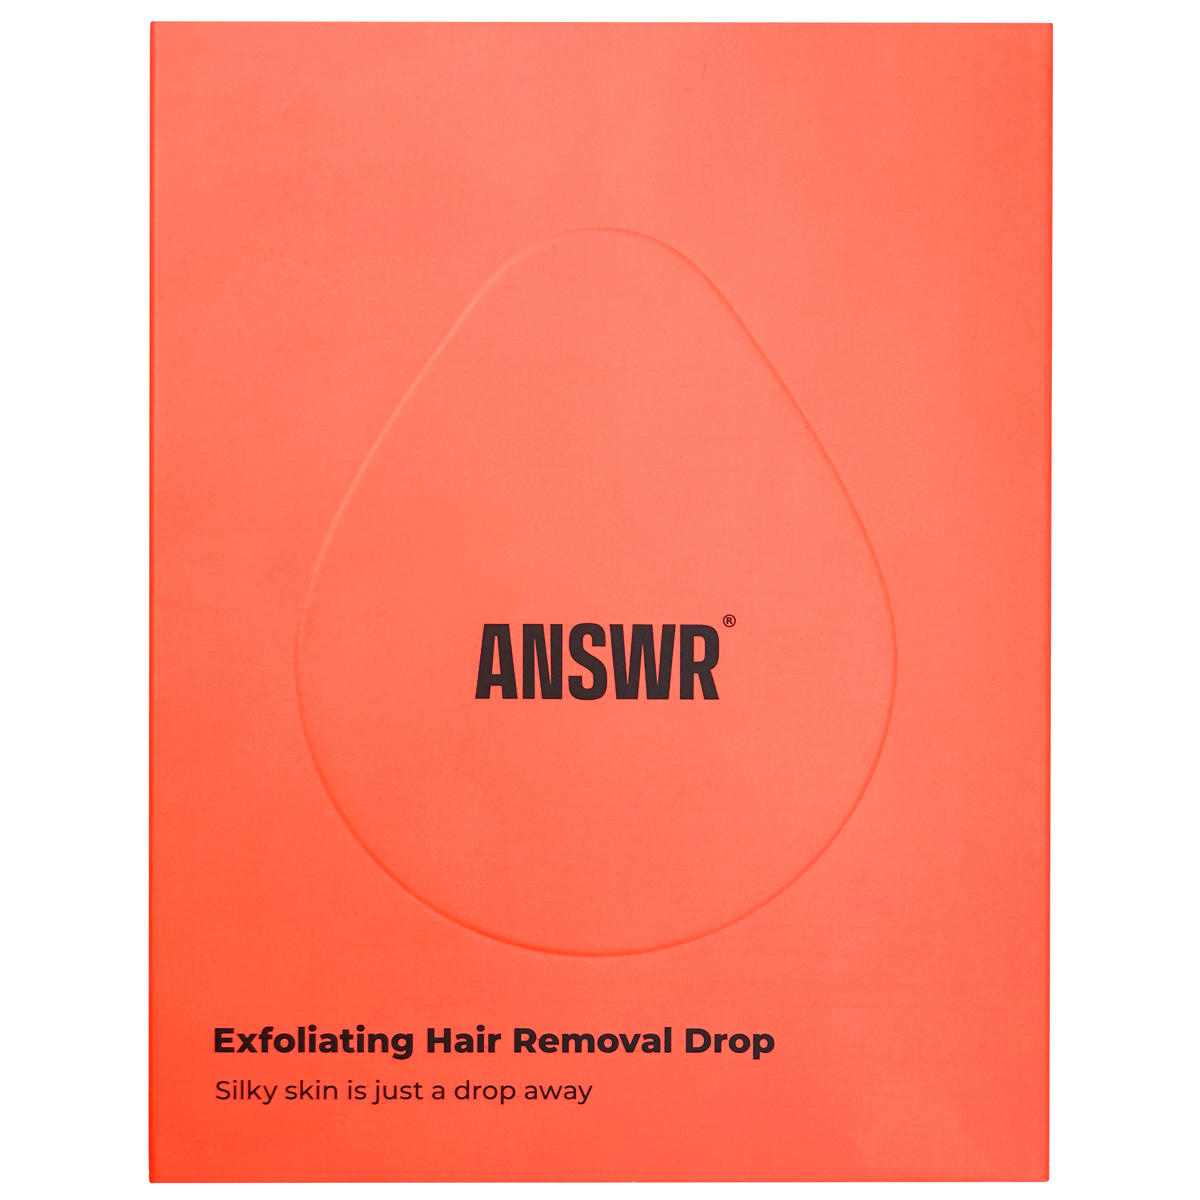 ANSWR Exfoliating Hair Removal Drop  - 3